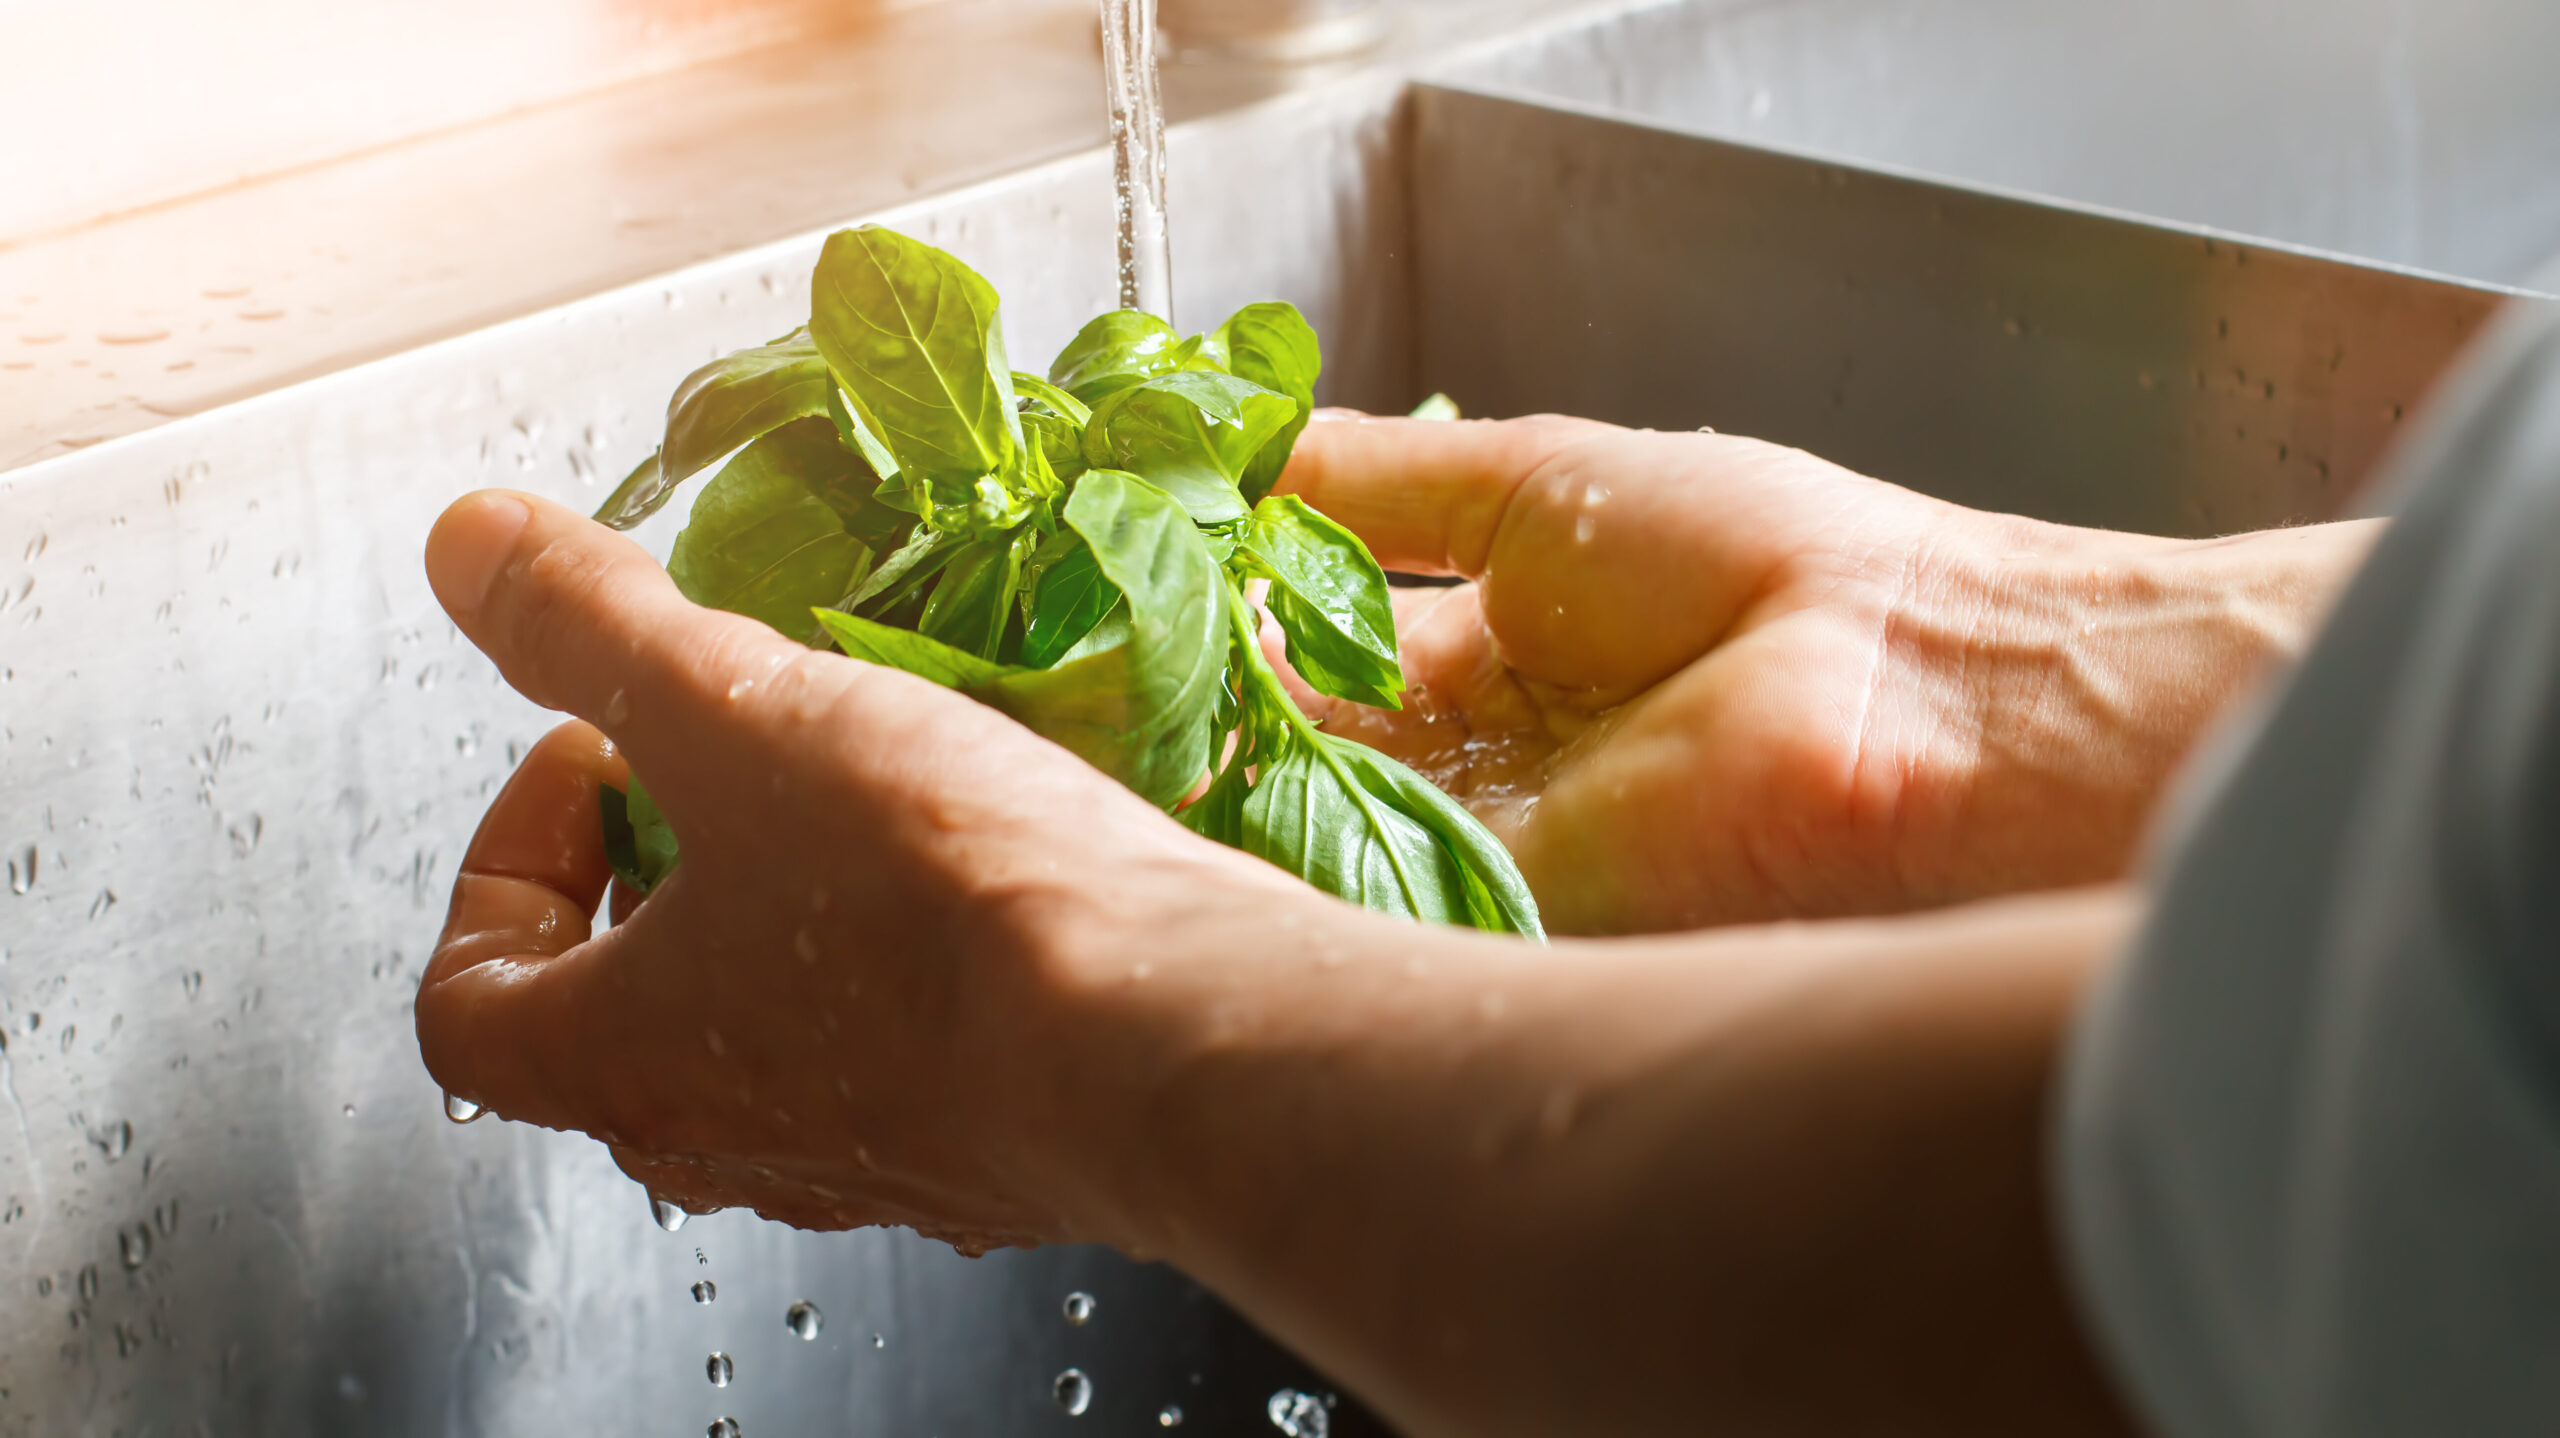 Male hands wash spinach.